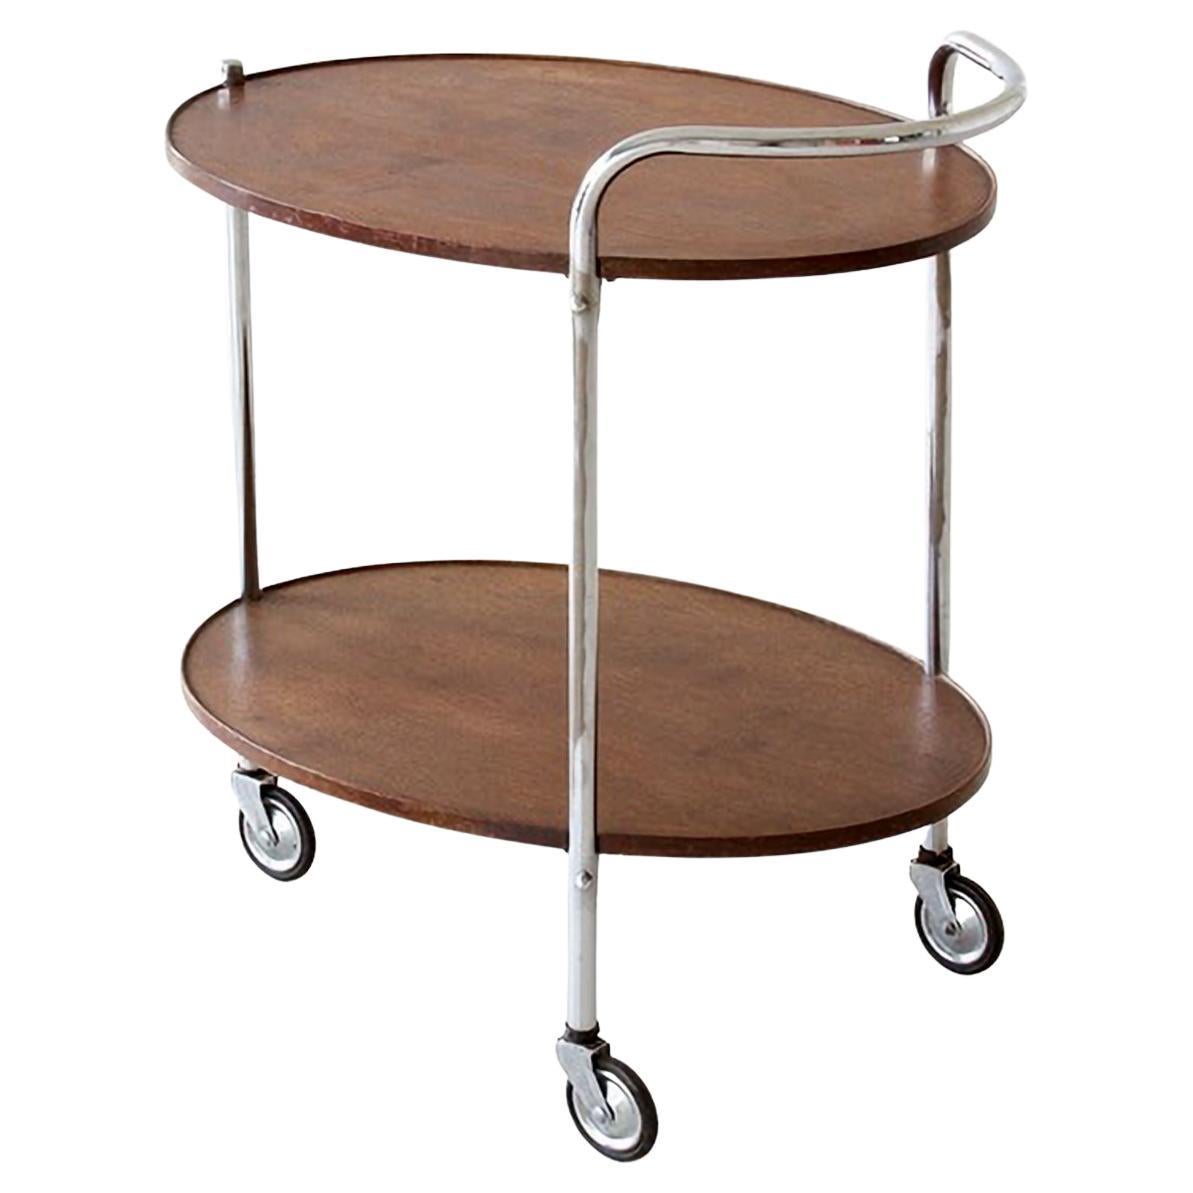 Modernist Serving Trolley with Two Oval Wooden Shelves Chromed Metal, circa 1930